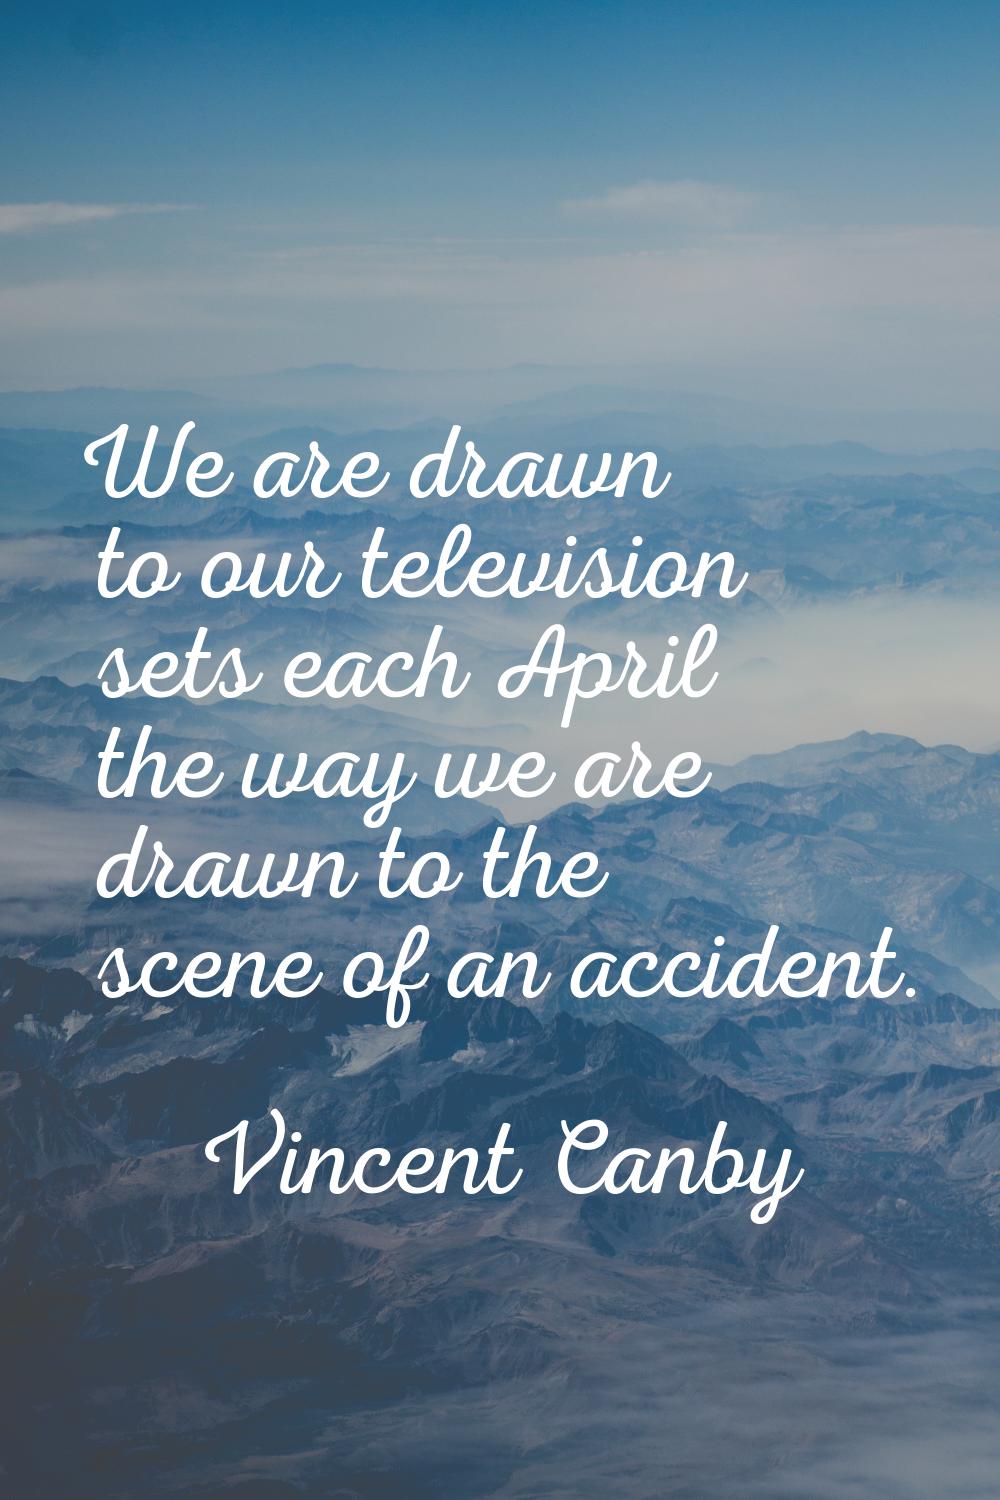 We are drawn to our television sets each April the way we are drawn to the scene of an accident.